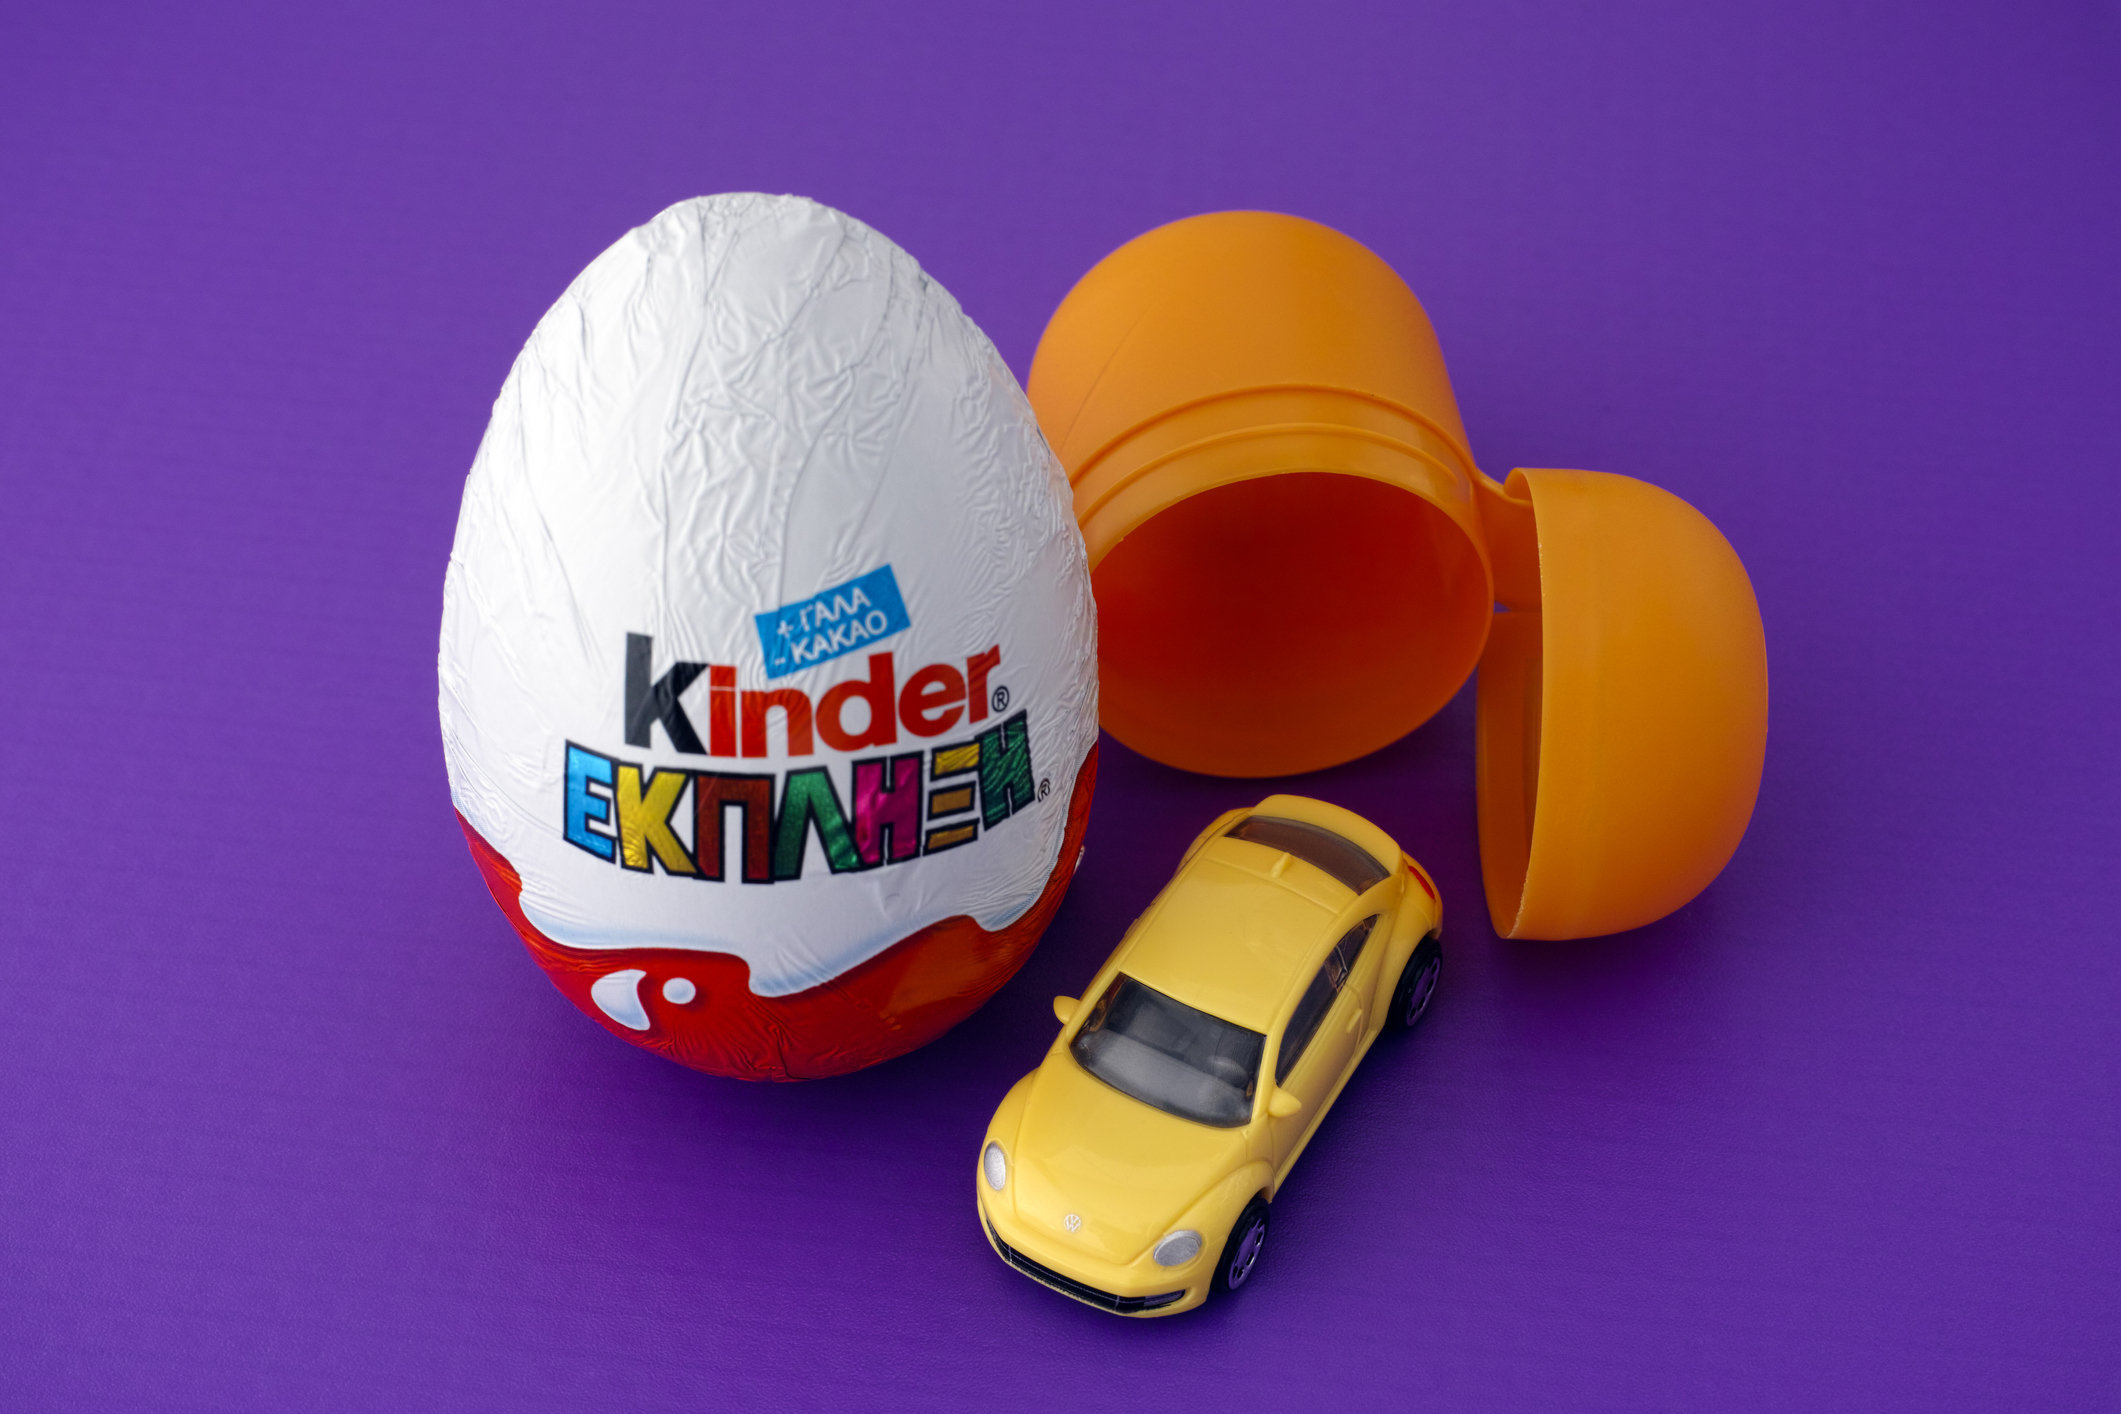 kinder eggs with toys inside